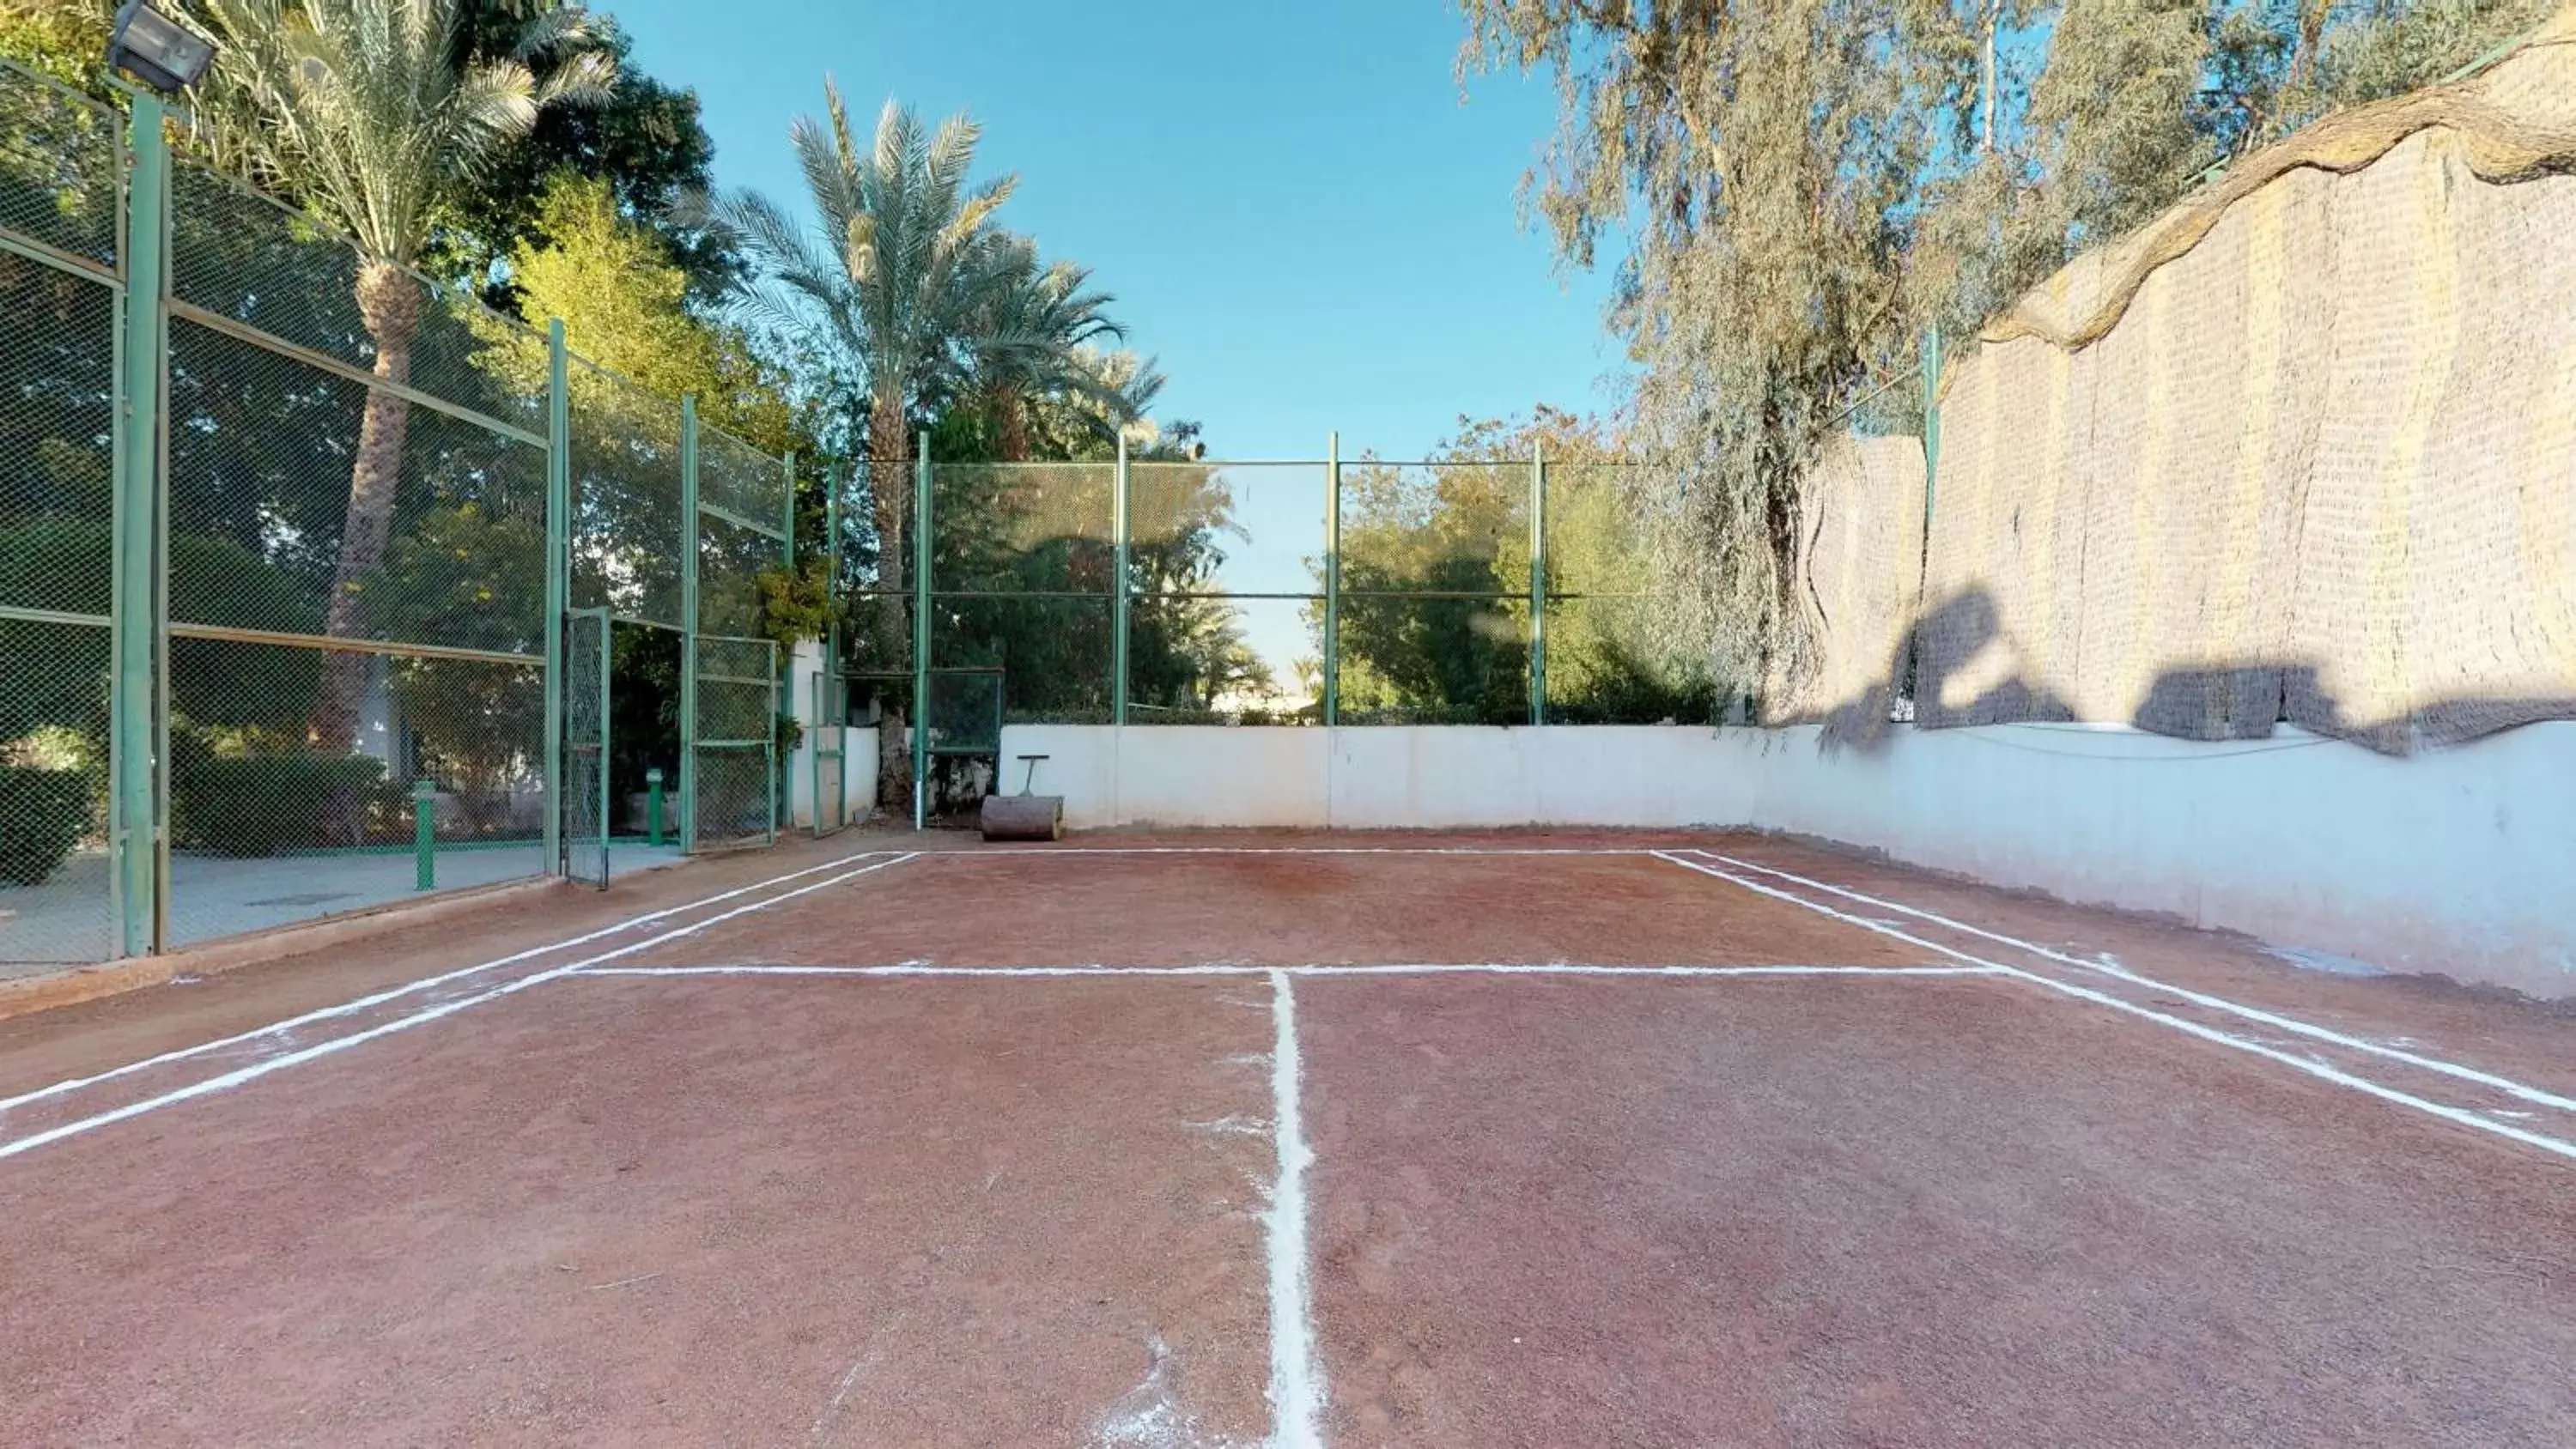 Tennis court, Other Activities in Falcon Hills Hotel